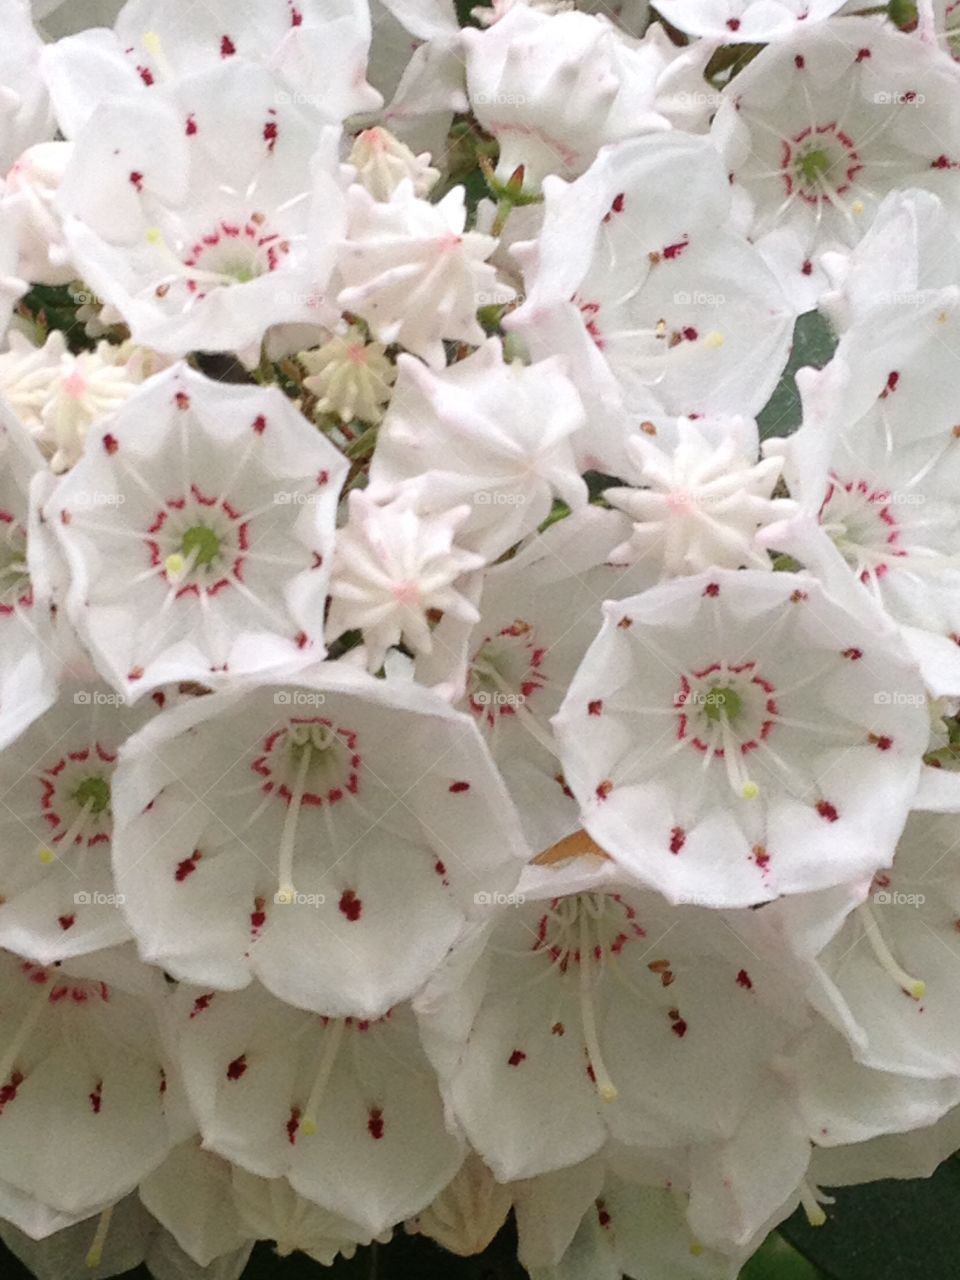 Mountain laurel blooming at outdoors